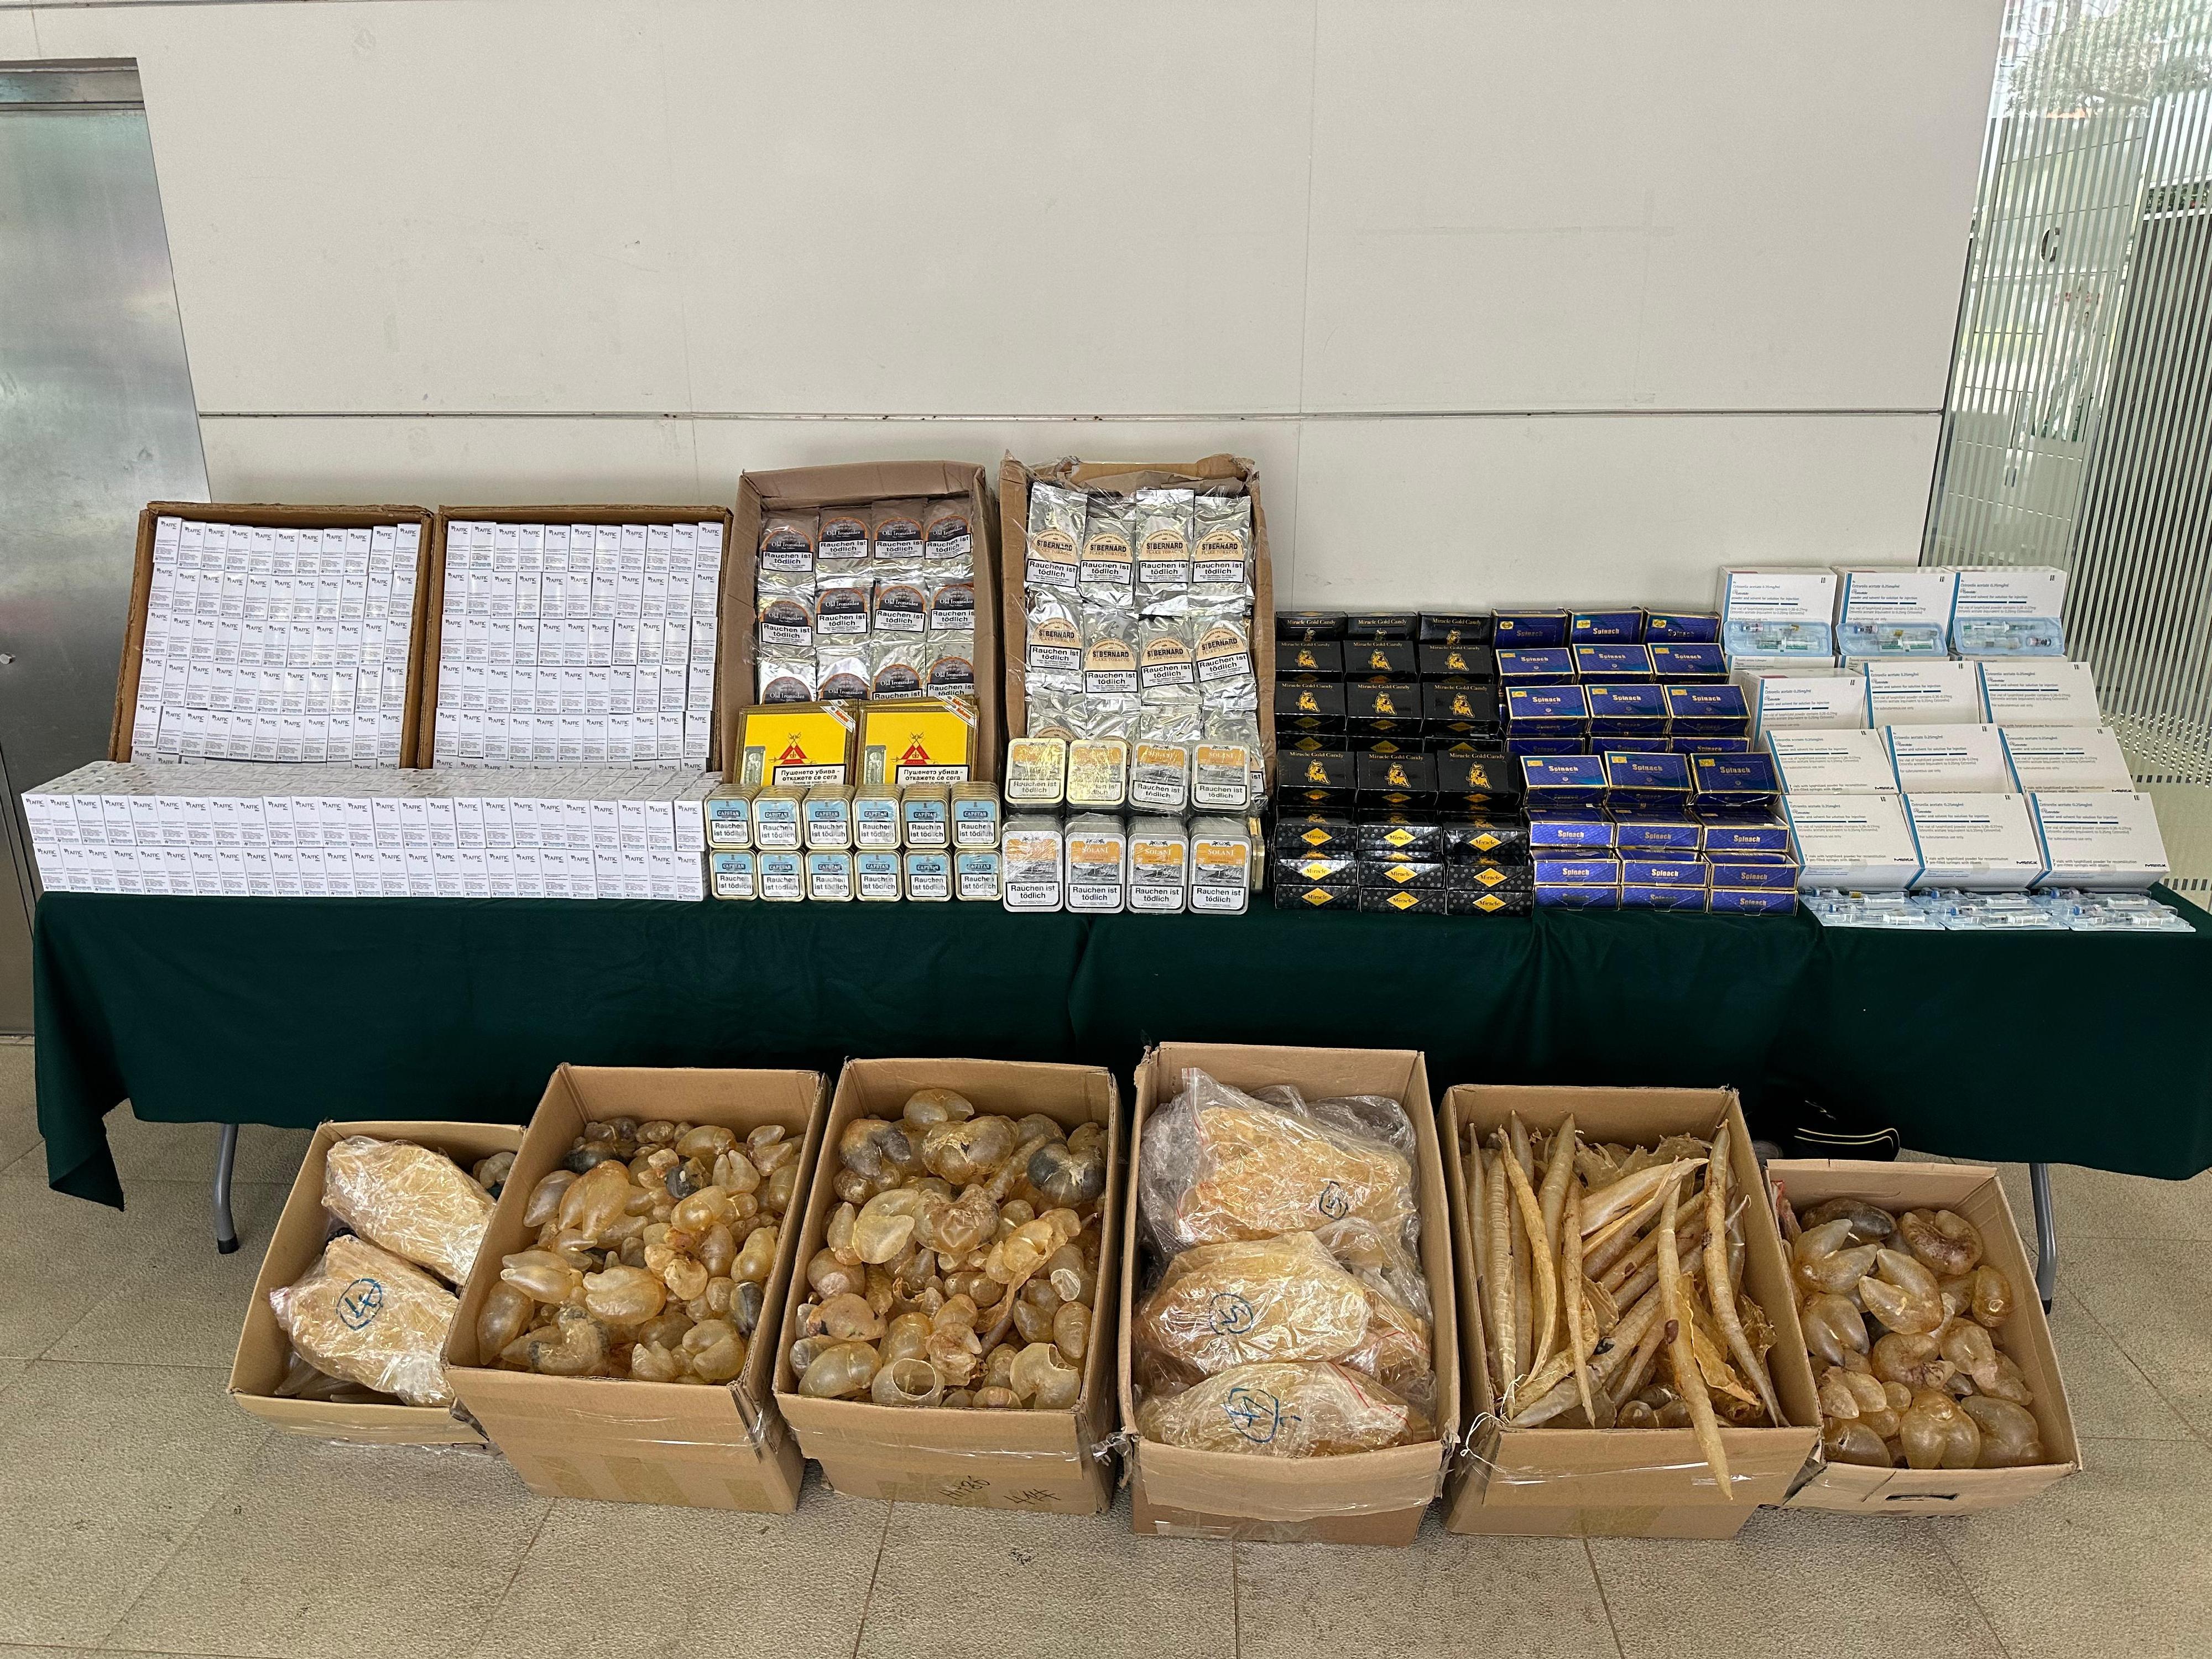 Hong Kong Customs yesterday (March 21) detected a suspected smuggling case involving a medium goods vehicle at the Hong Kong-Zhuhai-Macao Bridge Hong Kong Port. A batch of suspected smuggled goods, including about 25 kilograms of dried fish maws, about 127kg of tobacco products and about 3 500 boxes of pharmaceutical products, with a total estimated market value of about $2 million, were seized. Photo shows the suspected smuggled goods seized. 